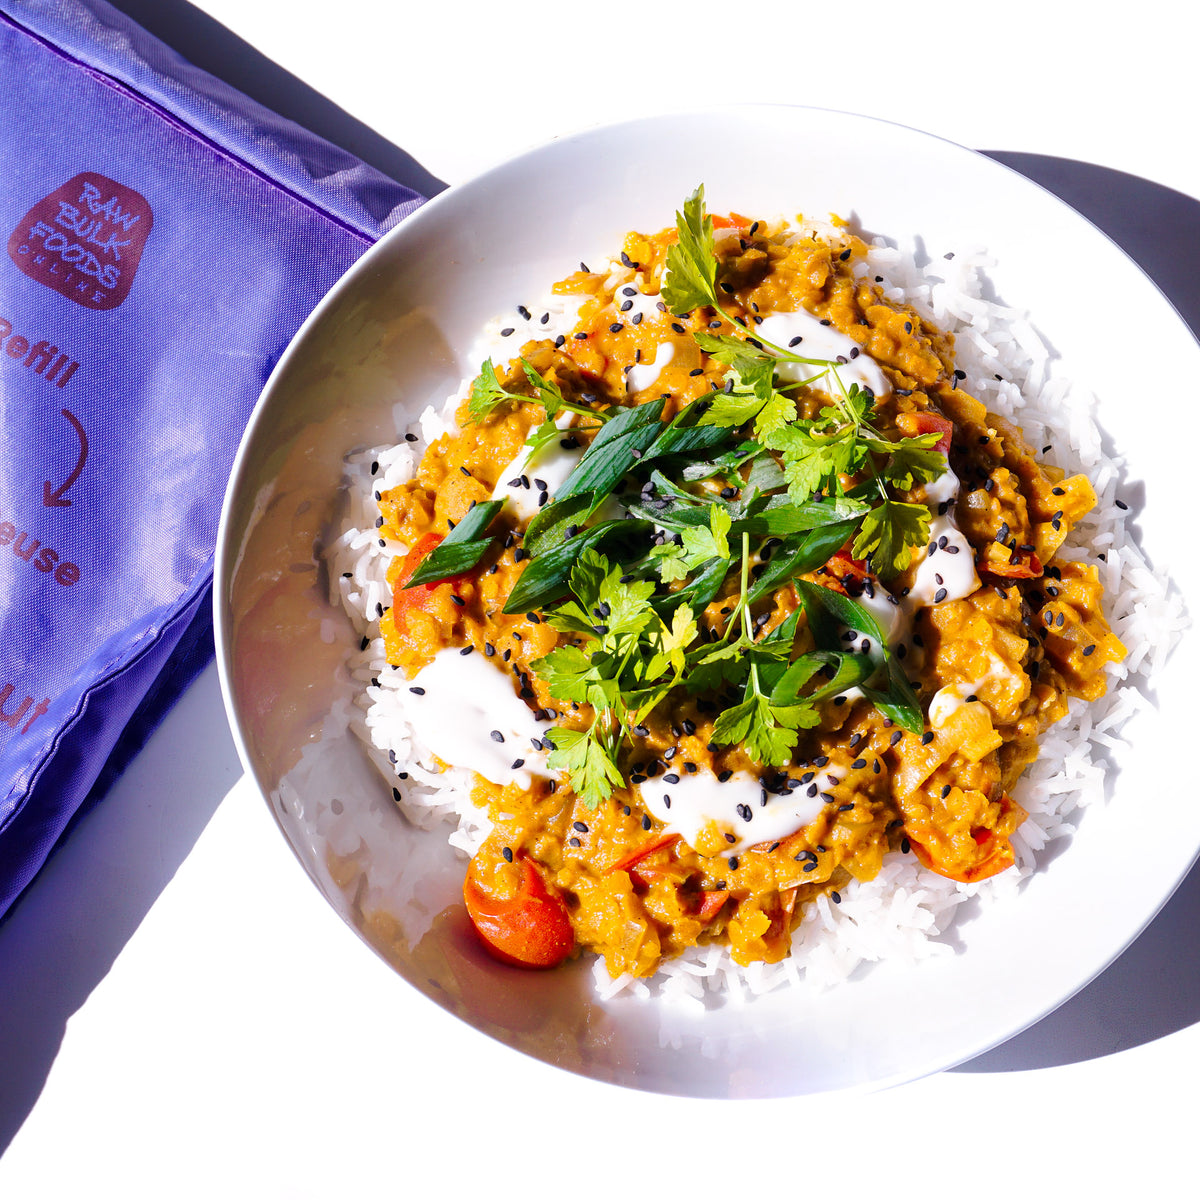 Dahl Curry & Rice "In a bag"